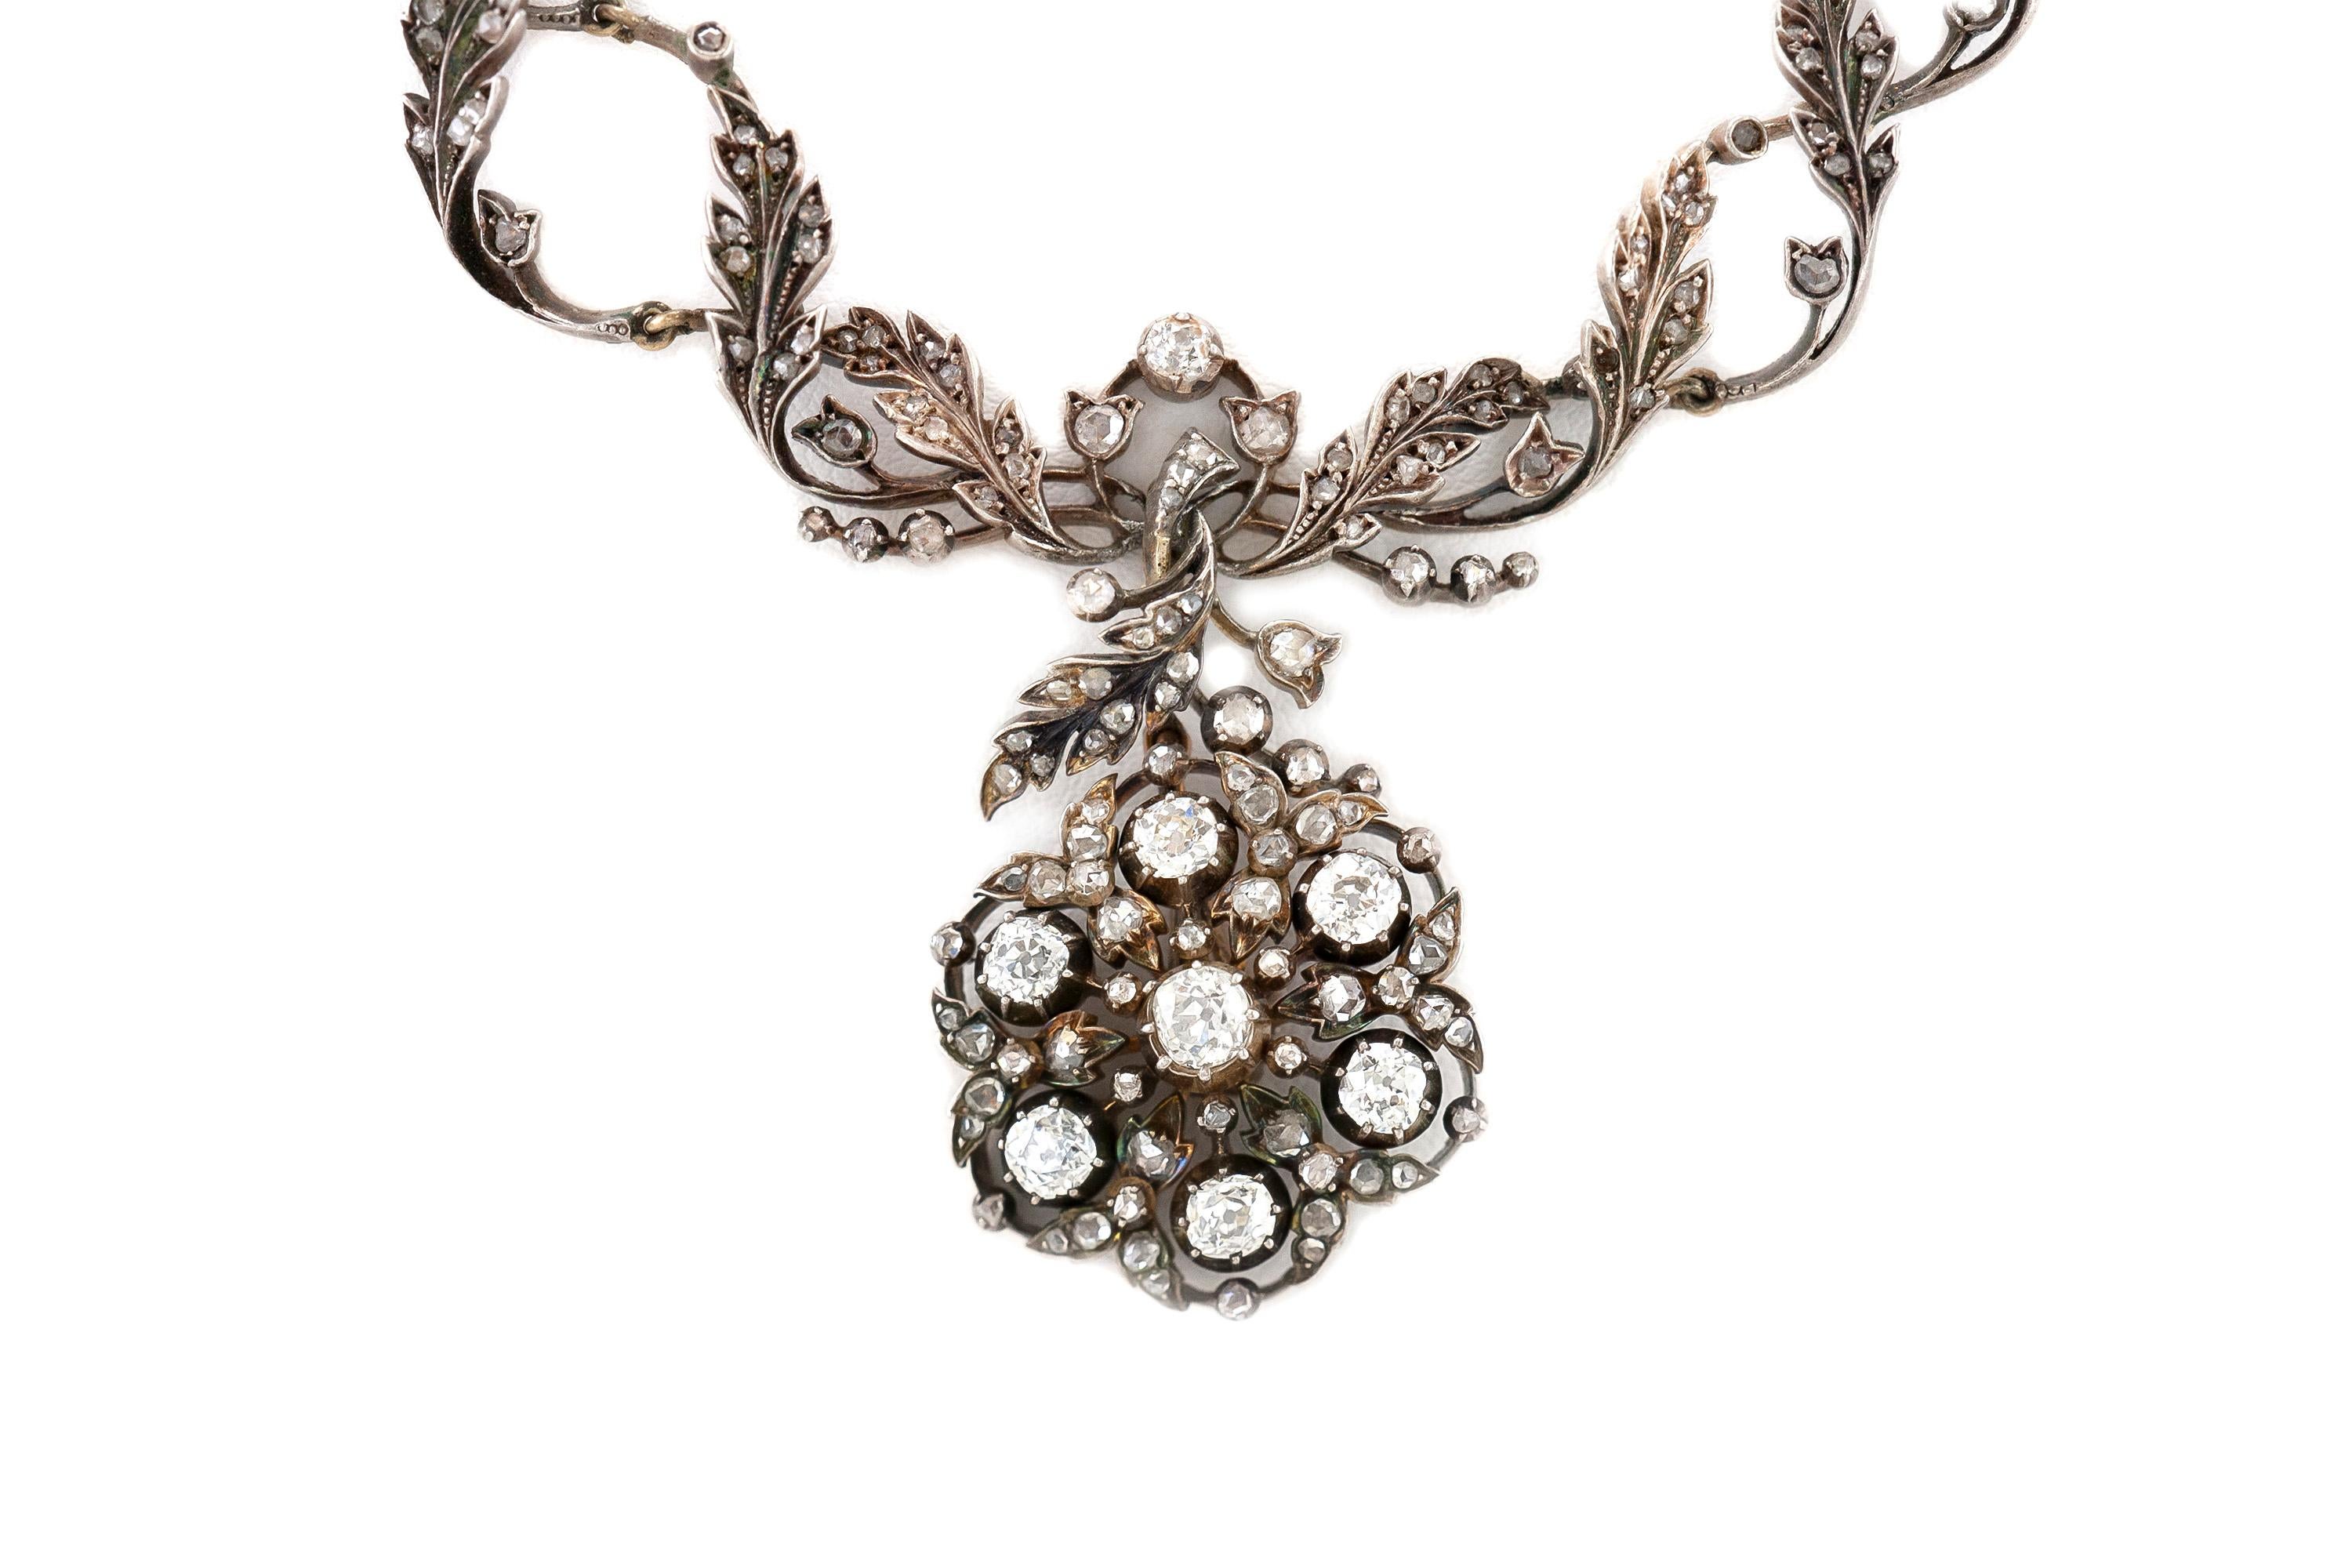 Finely crafted in silver and 14k gold with diamonds weighing approximately a total of 3.00 carats.
Victoran, circa 1860